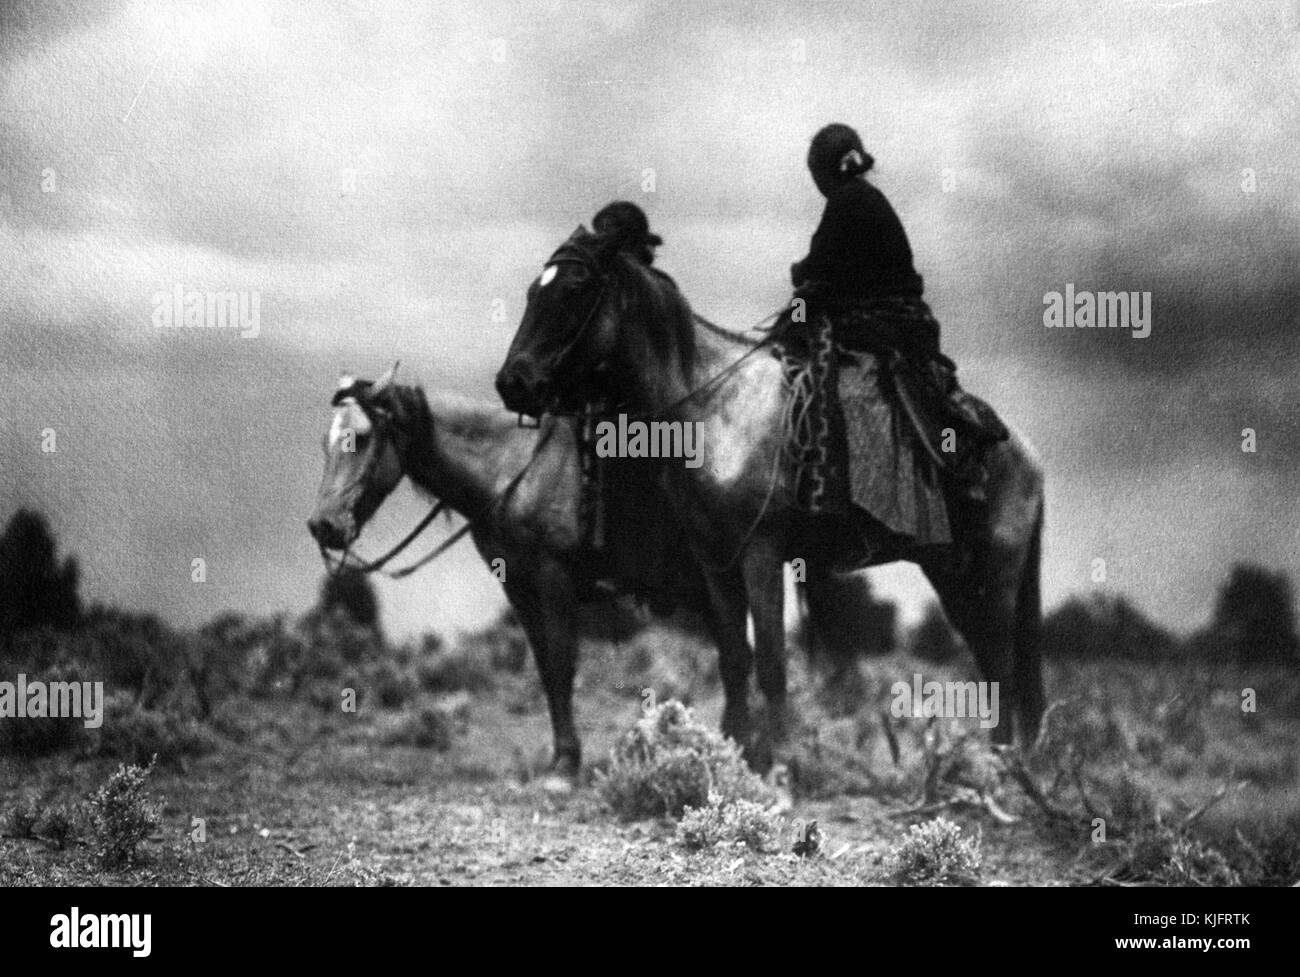 A photograph of two Navajo women on horseback, the woman in the background is obscured by the horse in the foreground, the woman in the foreground wears a dark colored top and a long patterned skirt, they are posed among short desert grass with stormy skies for a backdrop, 1906. From the New York Public Library. Stock Photo